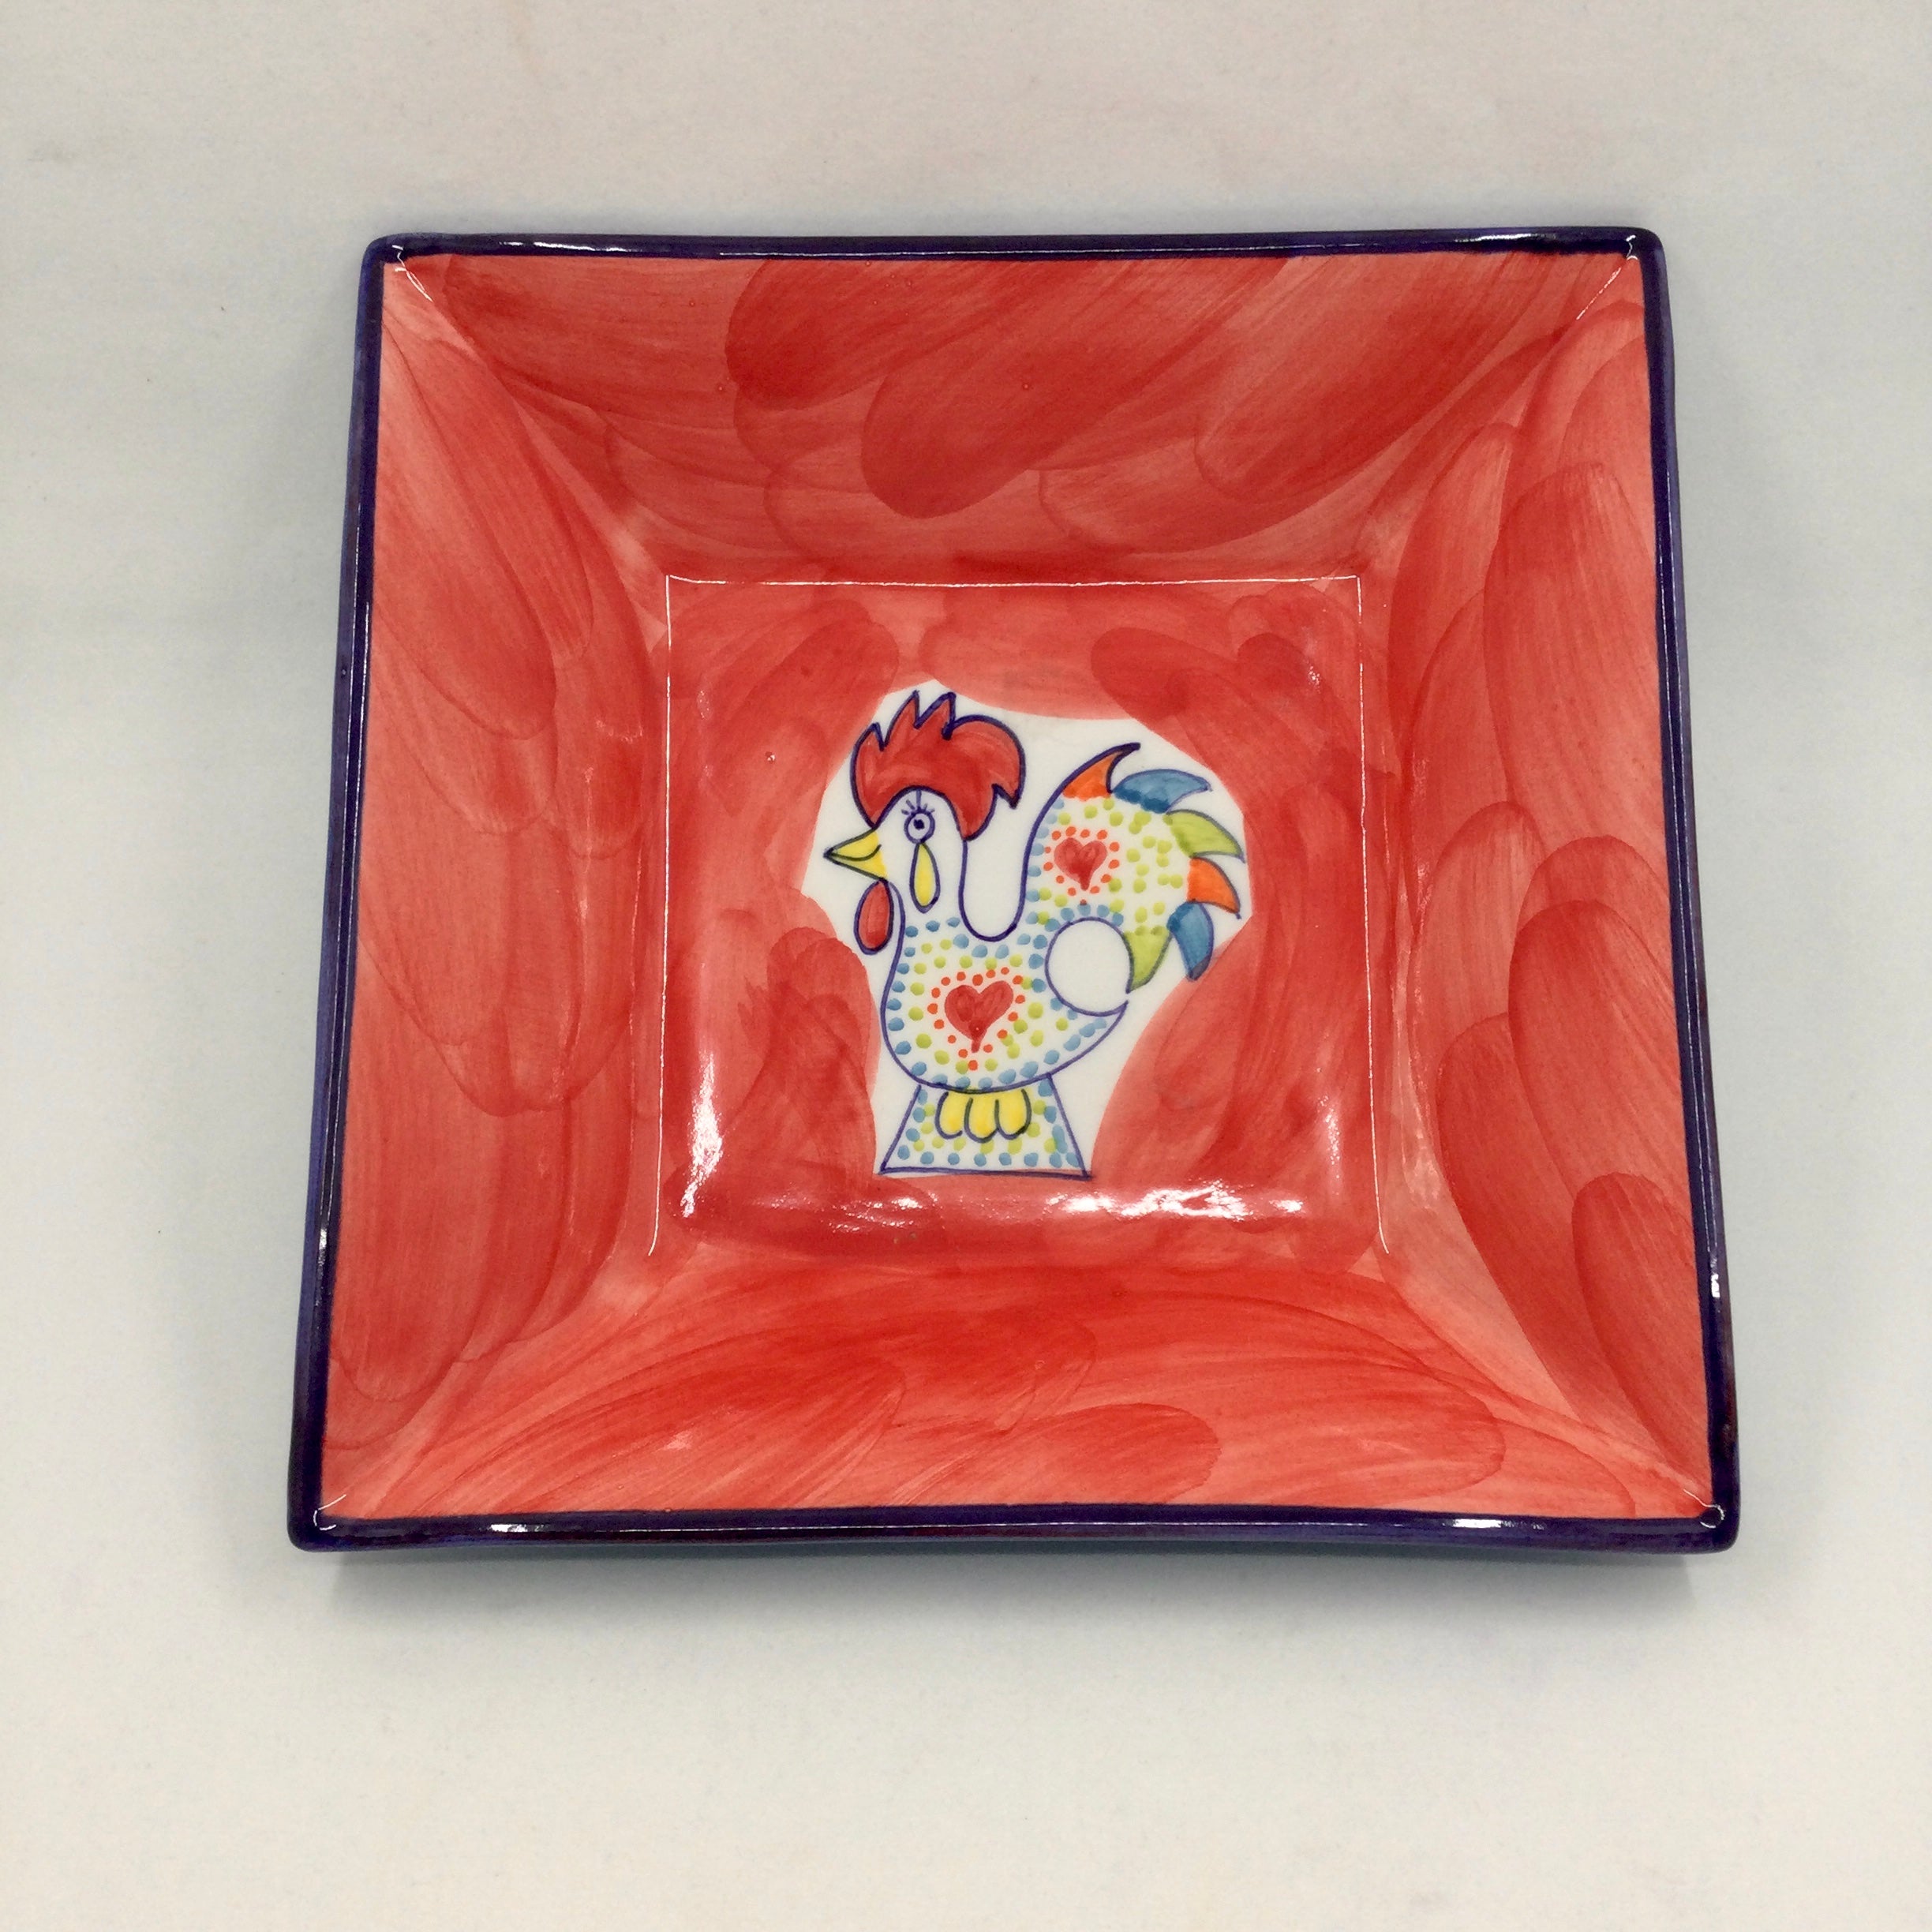 Joyful Rooster - Small Square Serving Dish